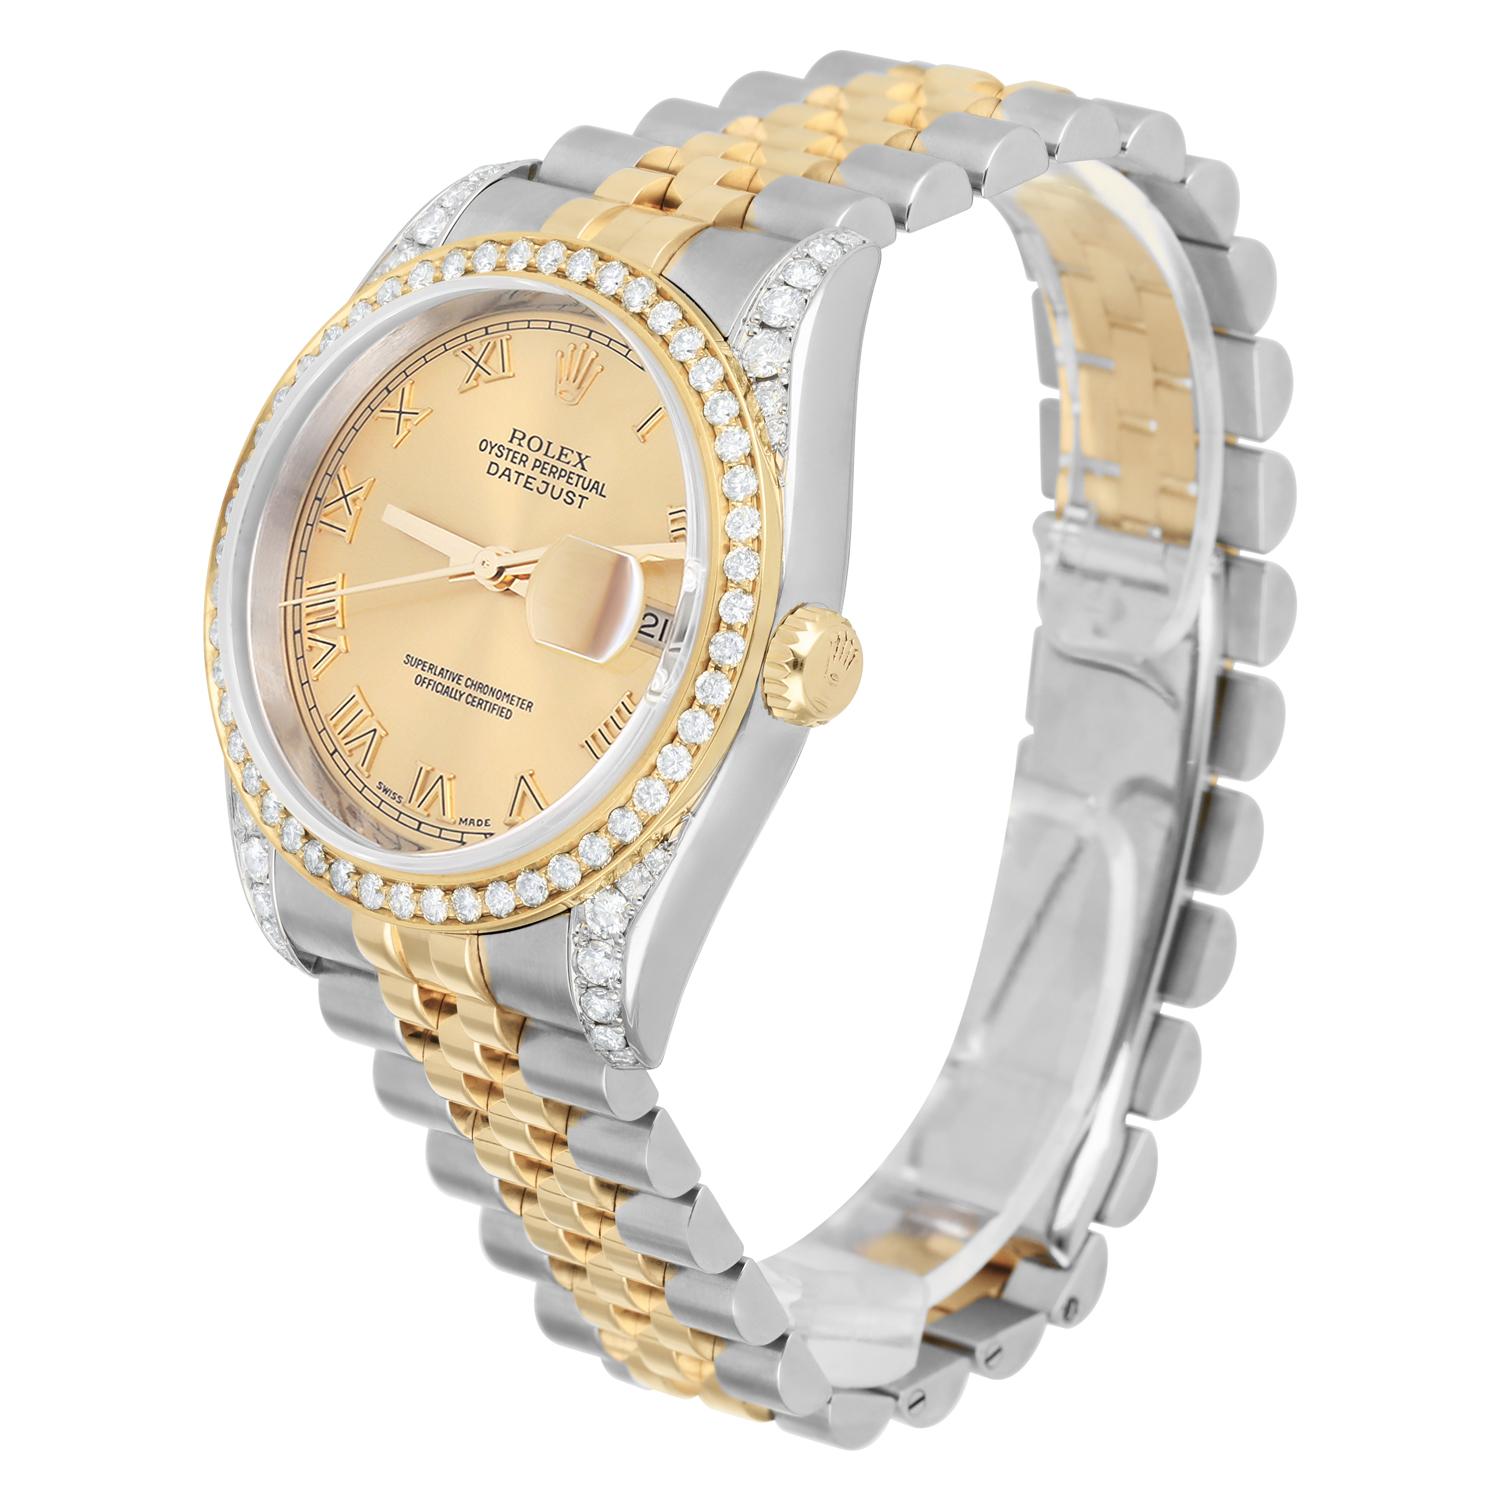 Rolex Datejust 36 Gold & Steel 116233 Champagne Roman Dial Diamond Bezel Jubilee In Excellent Condition For Sale In New York, NY